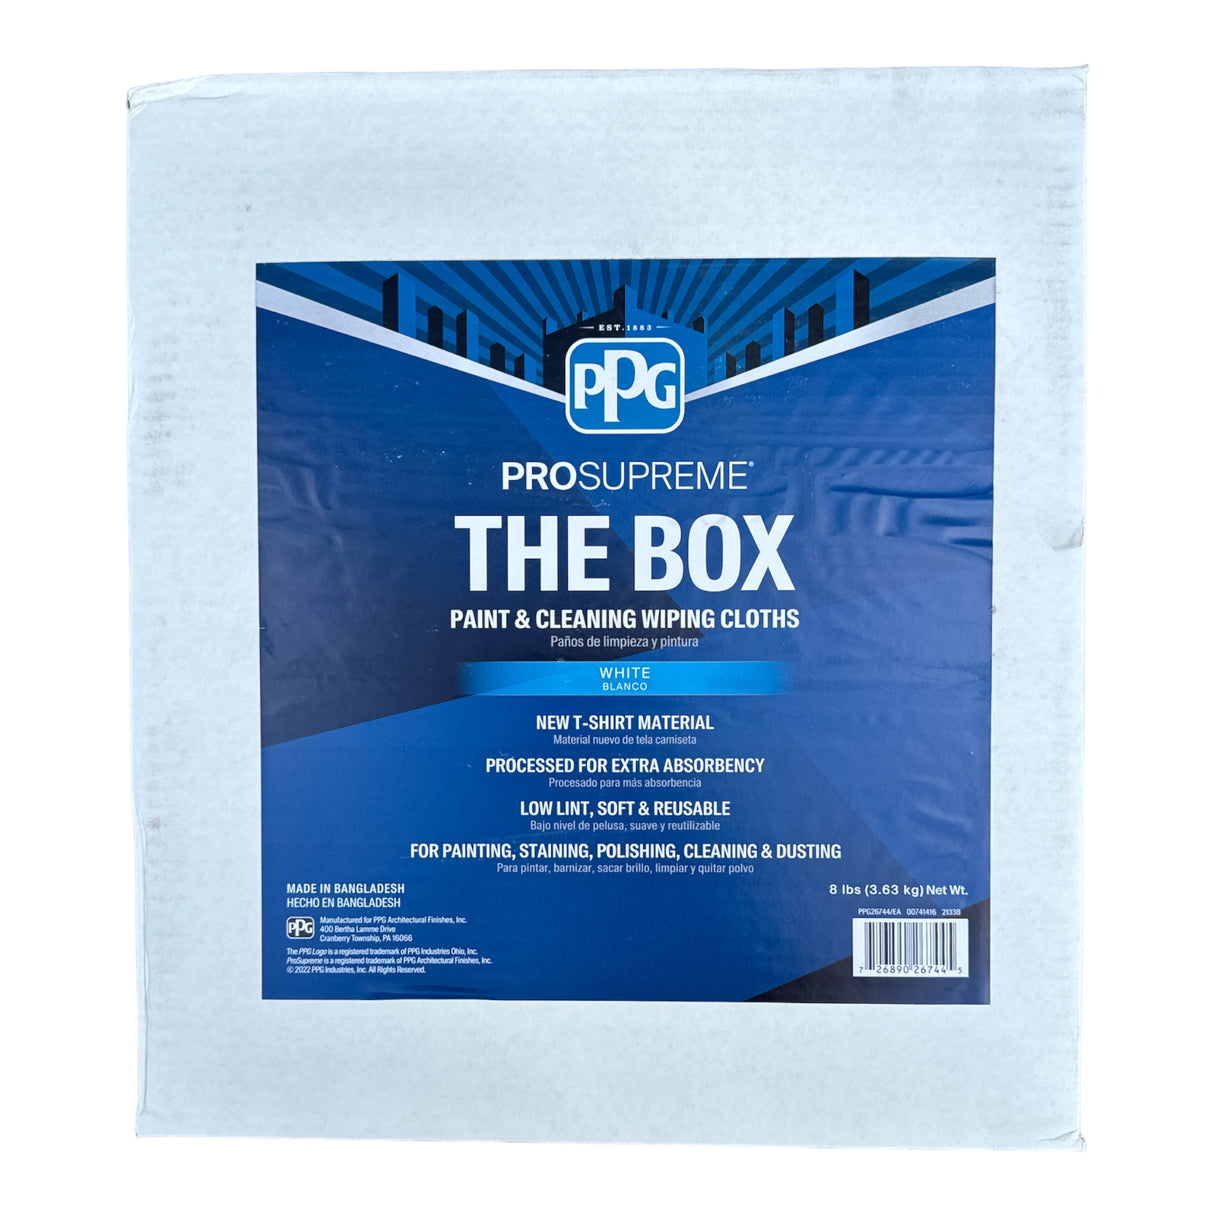 PPG ProSupreme “The Box” Paint & Cleaning Wiping Cloths